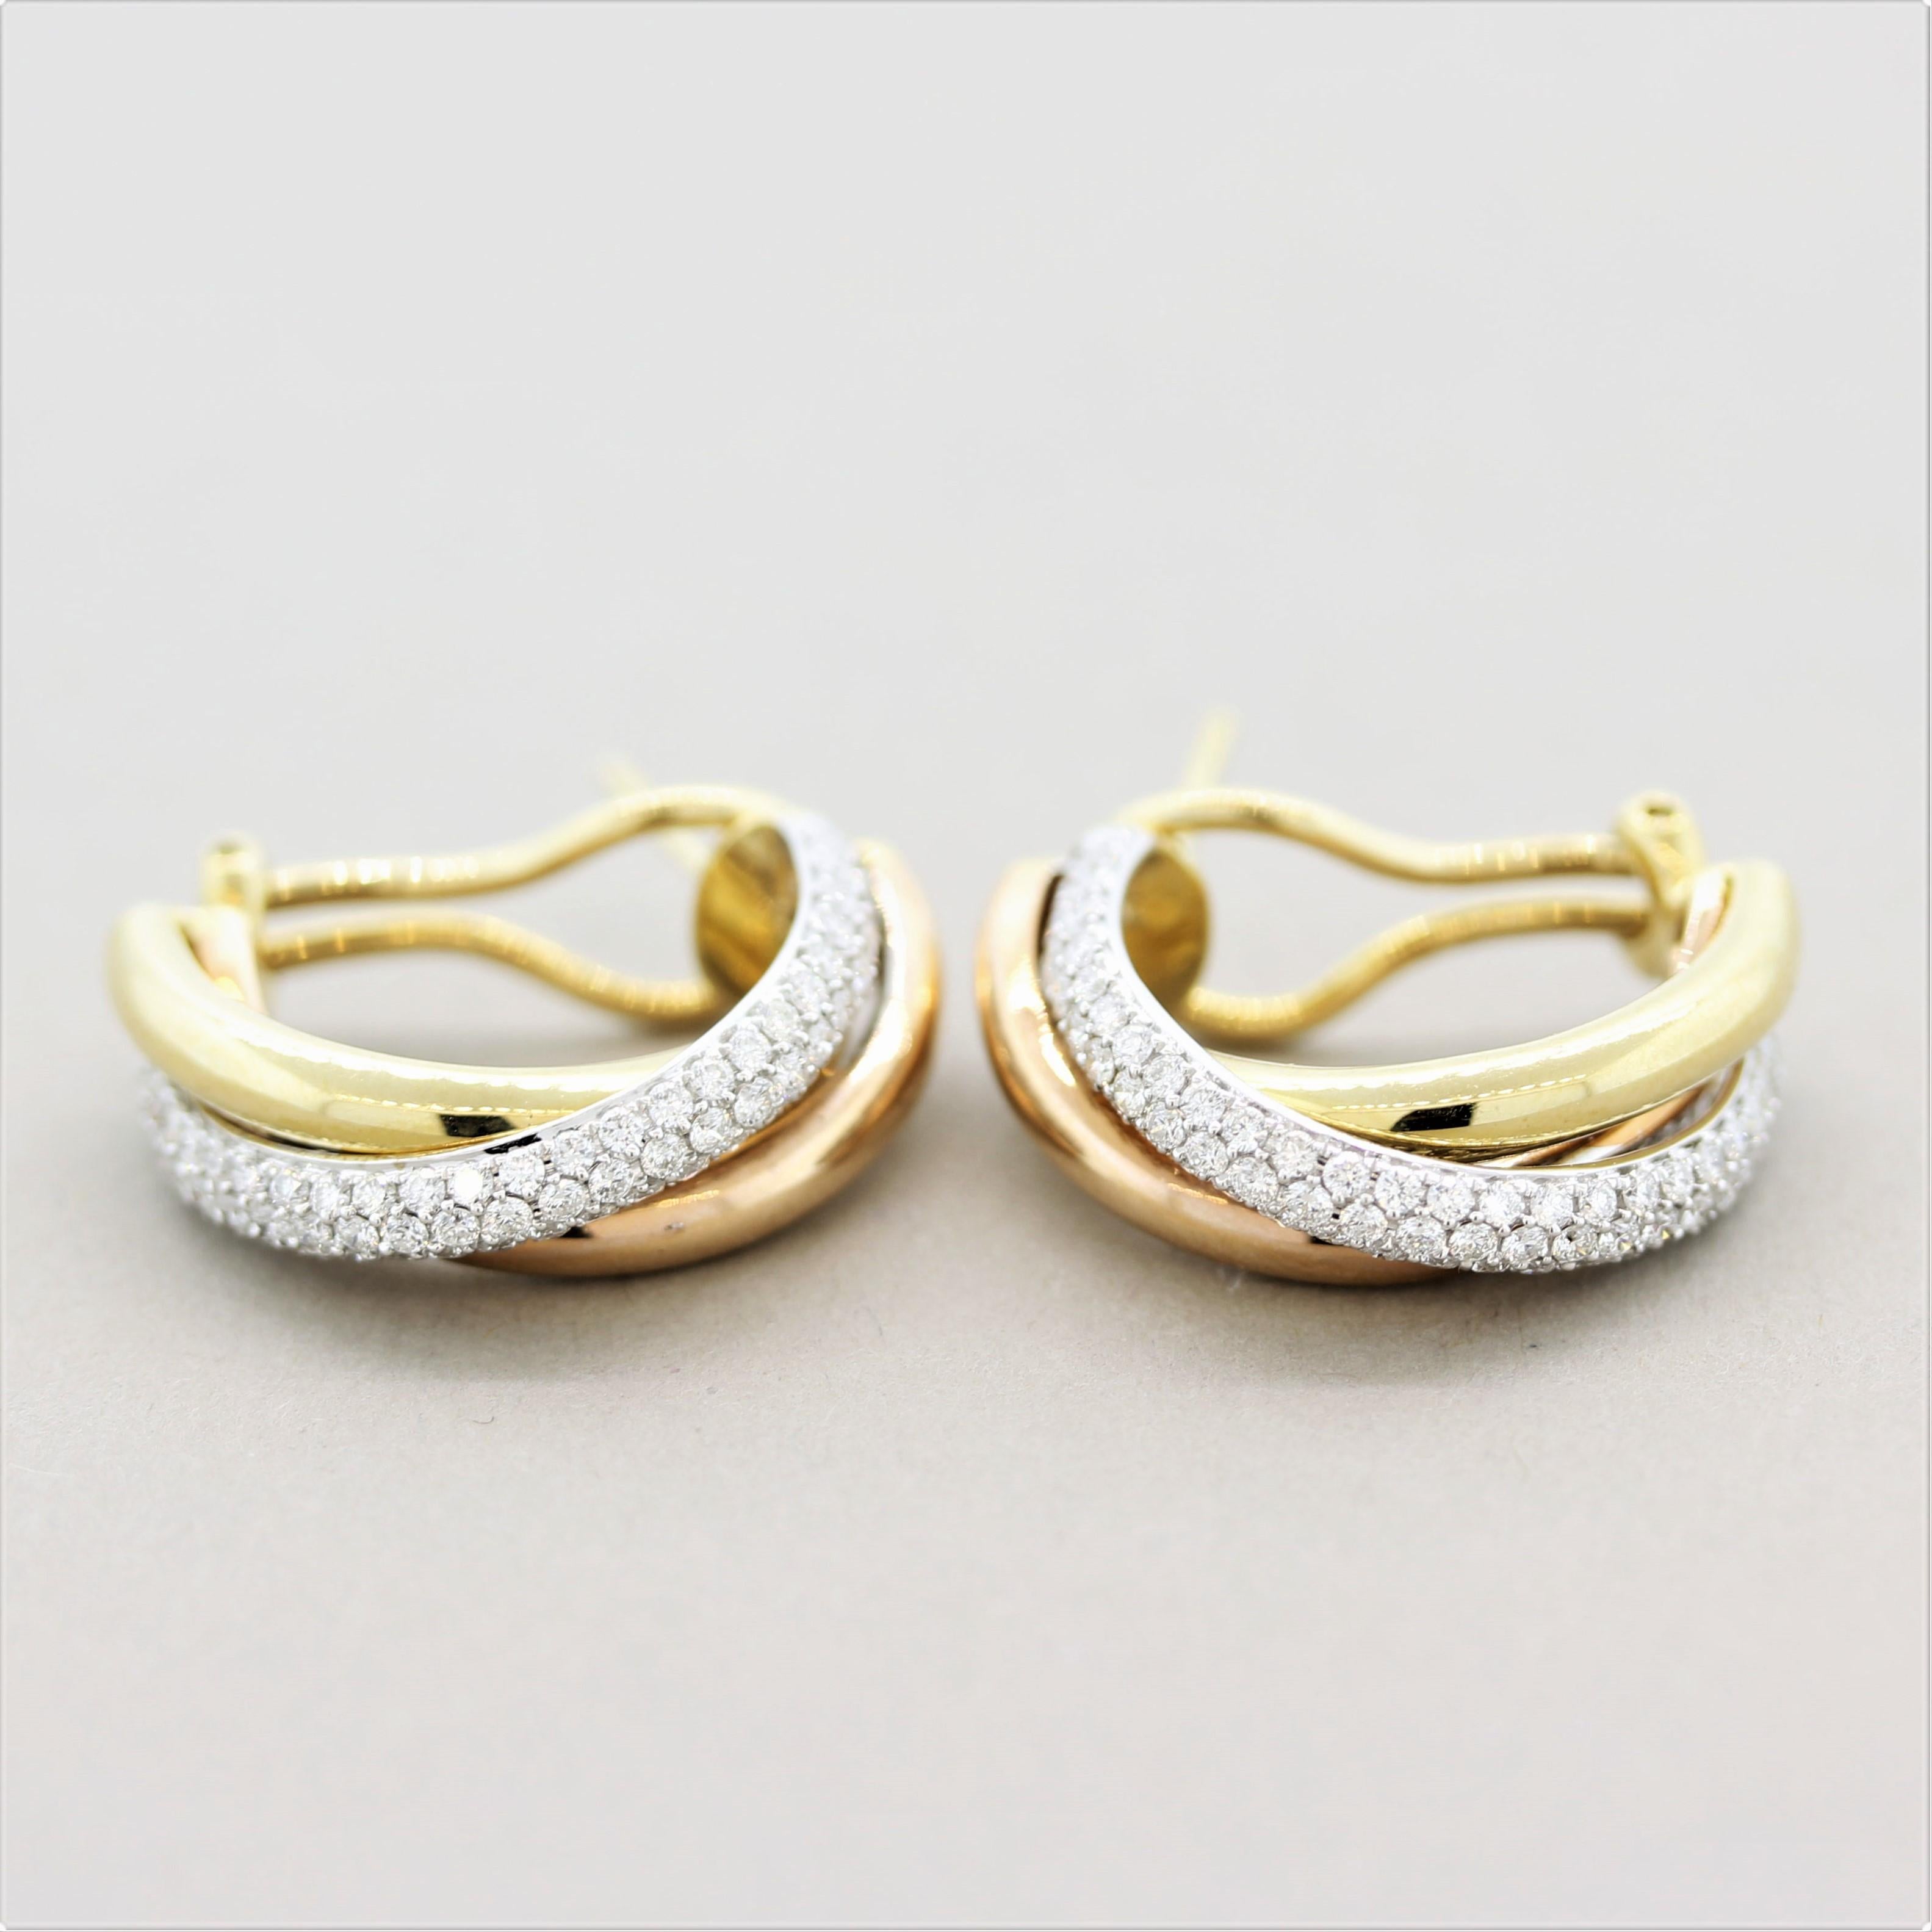 A sleek and sexy pair of earrings featuring 1.27 carats of round brilliant-cut diamonds. They are set over 18k white gold while two other hoops twist around it, one in yellow gold while the other rose gold giving the piece a unique tri-tone style.